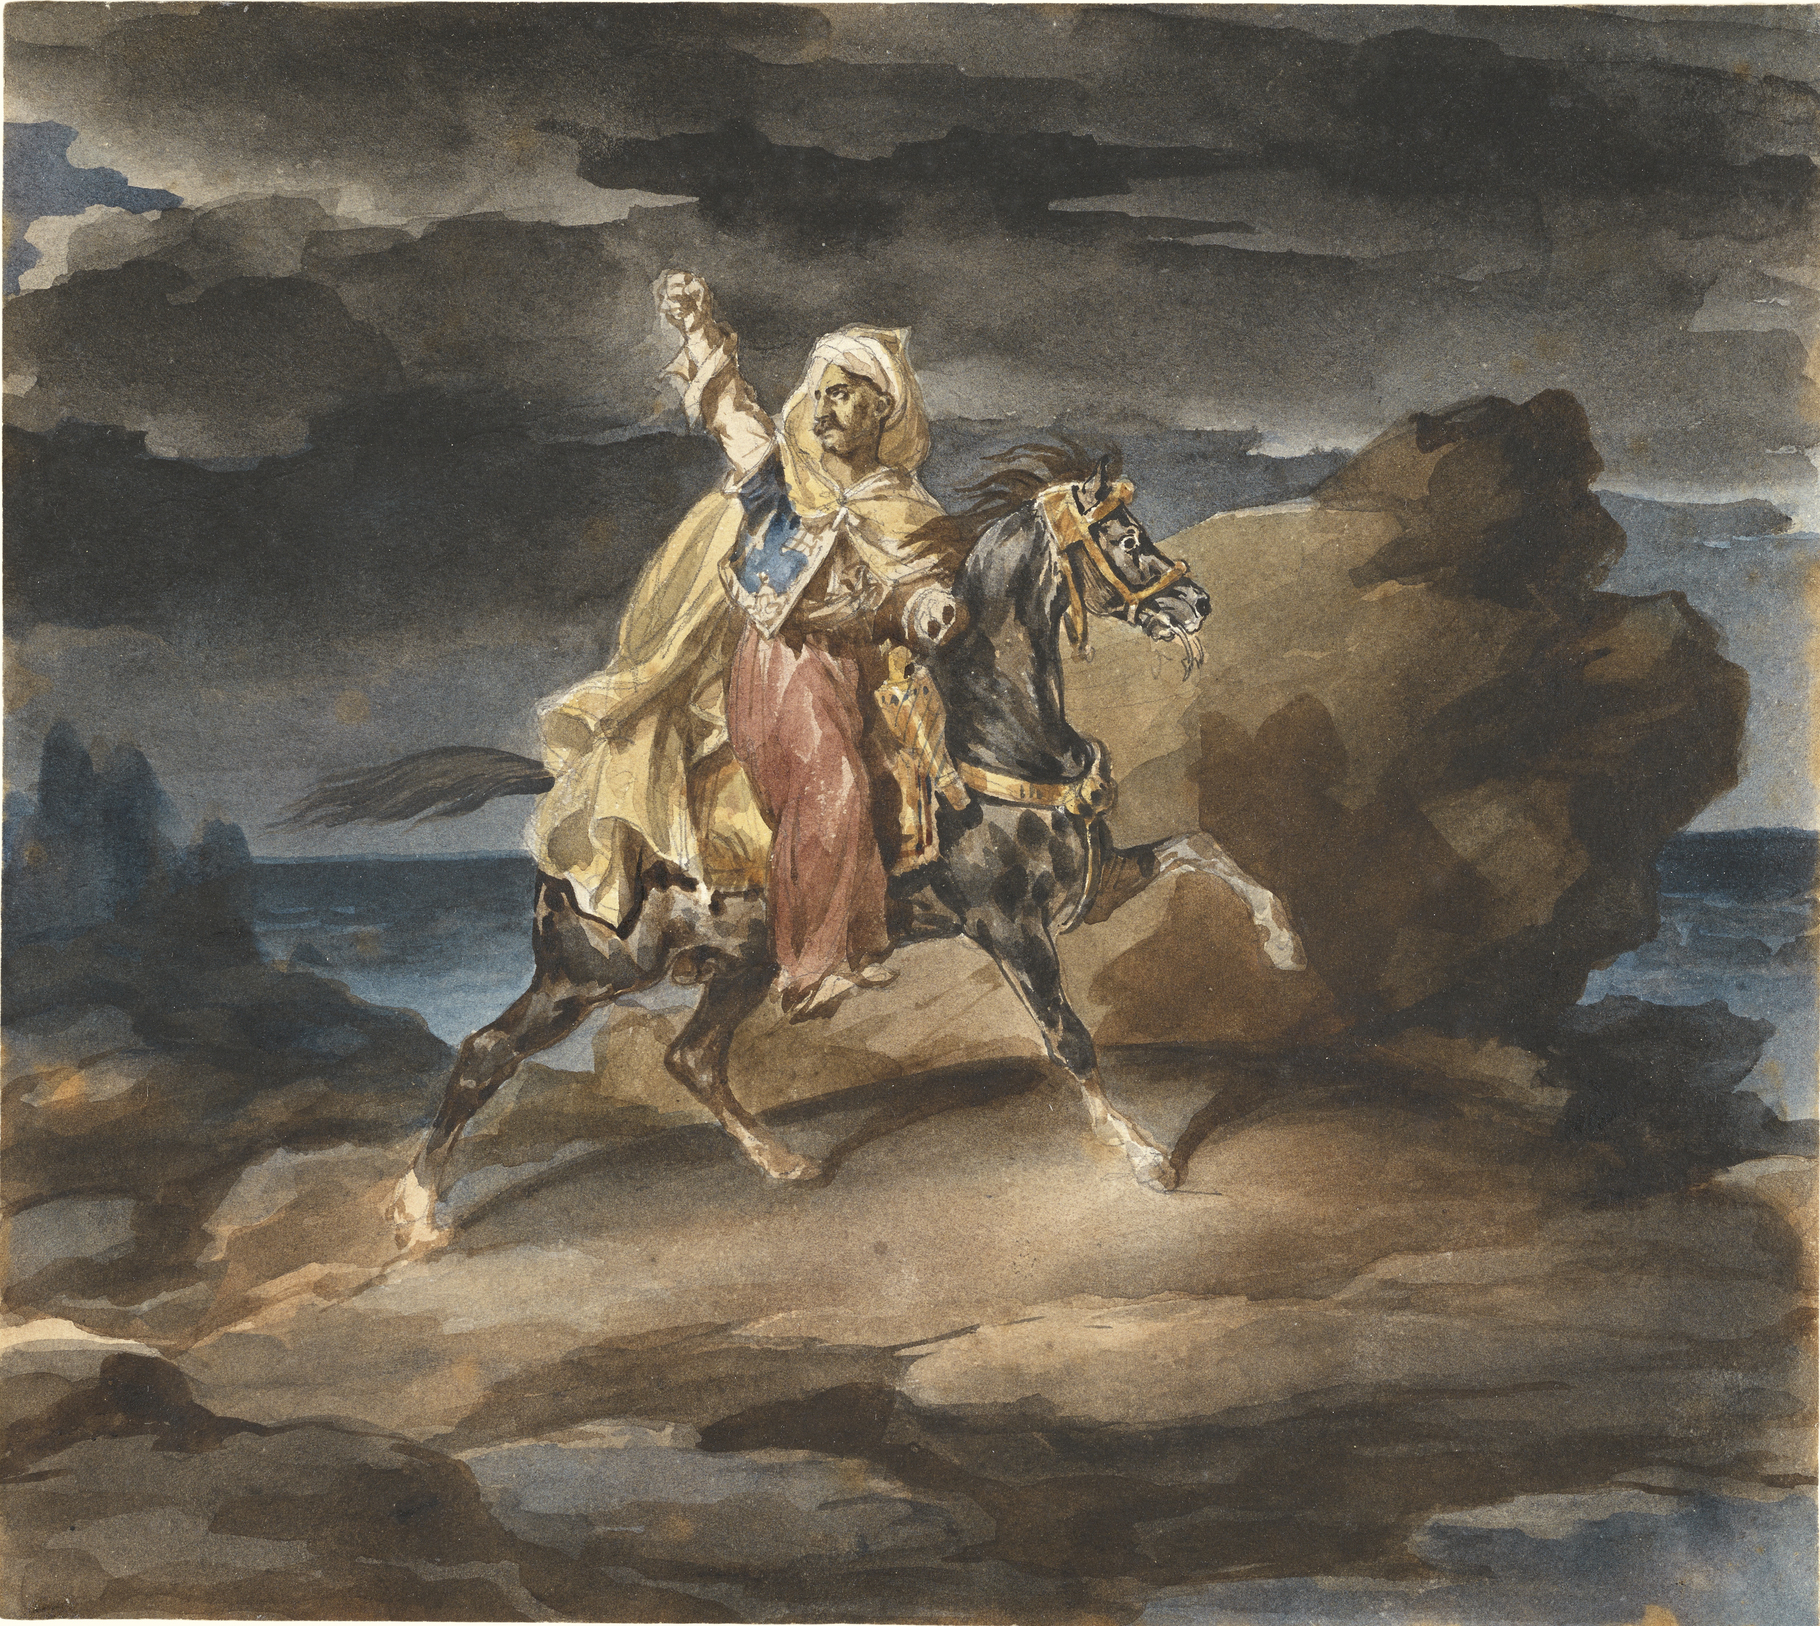 Théodore Géricault (French, 1791–1824), "The Giaour," watercolor painting